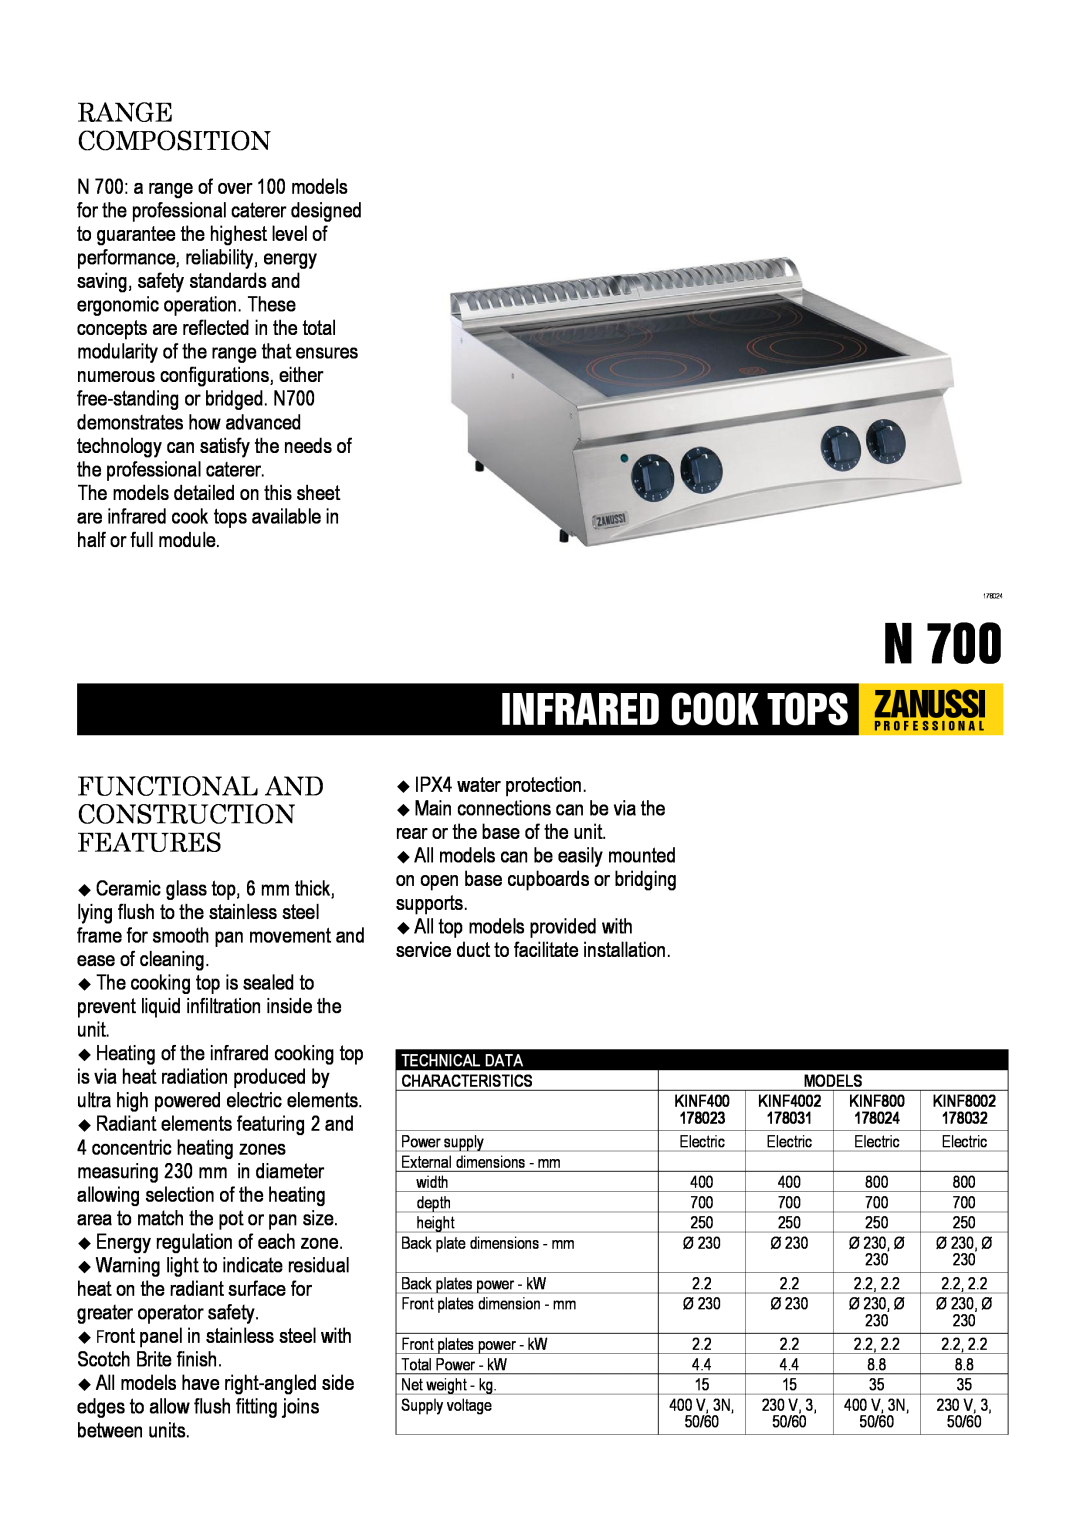 Zanussi KINF4002, KINF800 dimensions Infrared Cook Tops, Zanussi, Range Composition, Functional And Construction Features 